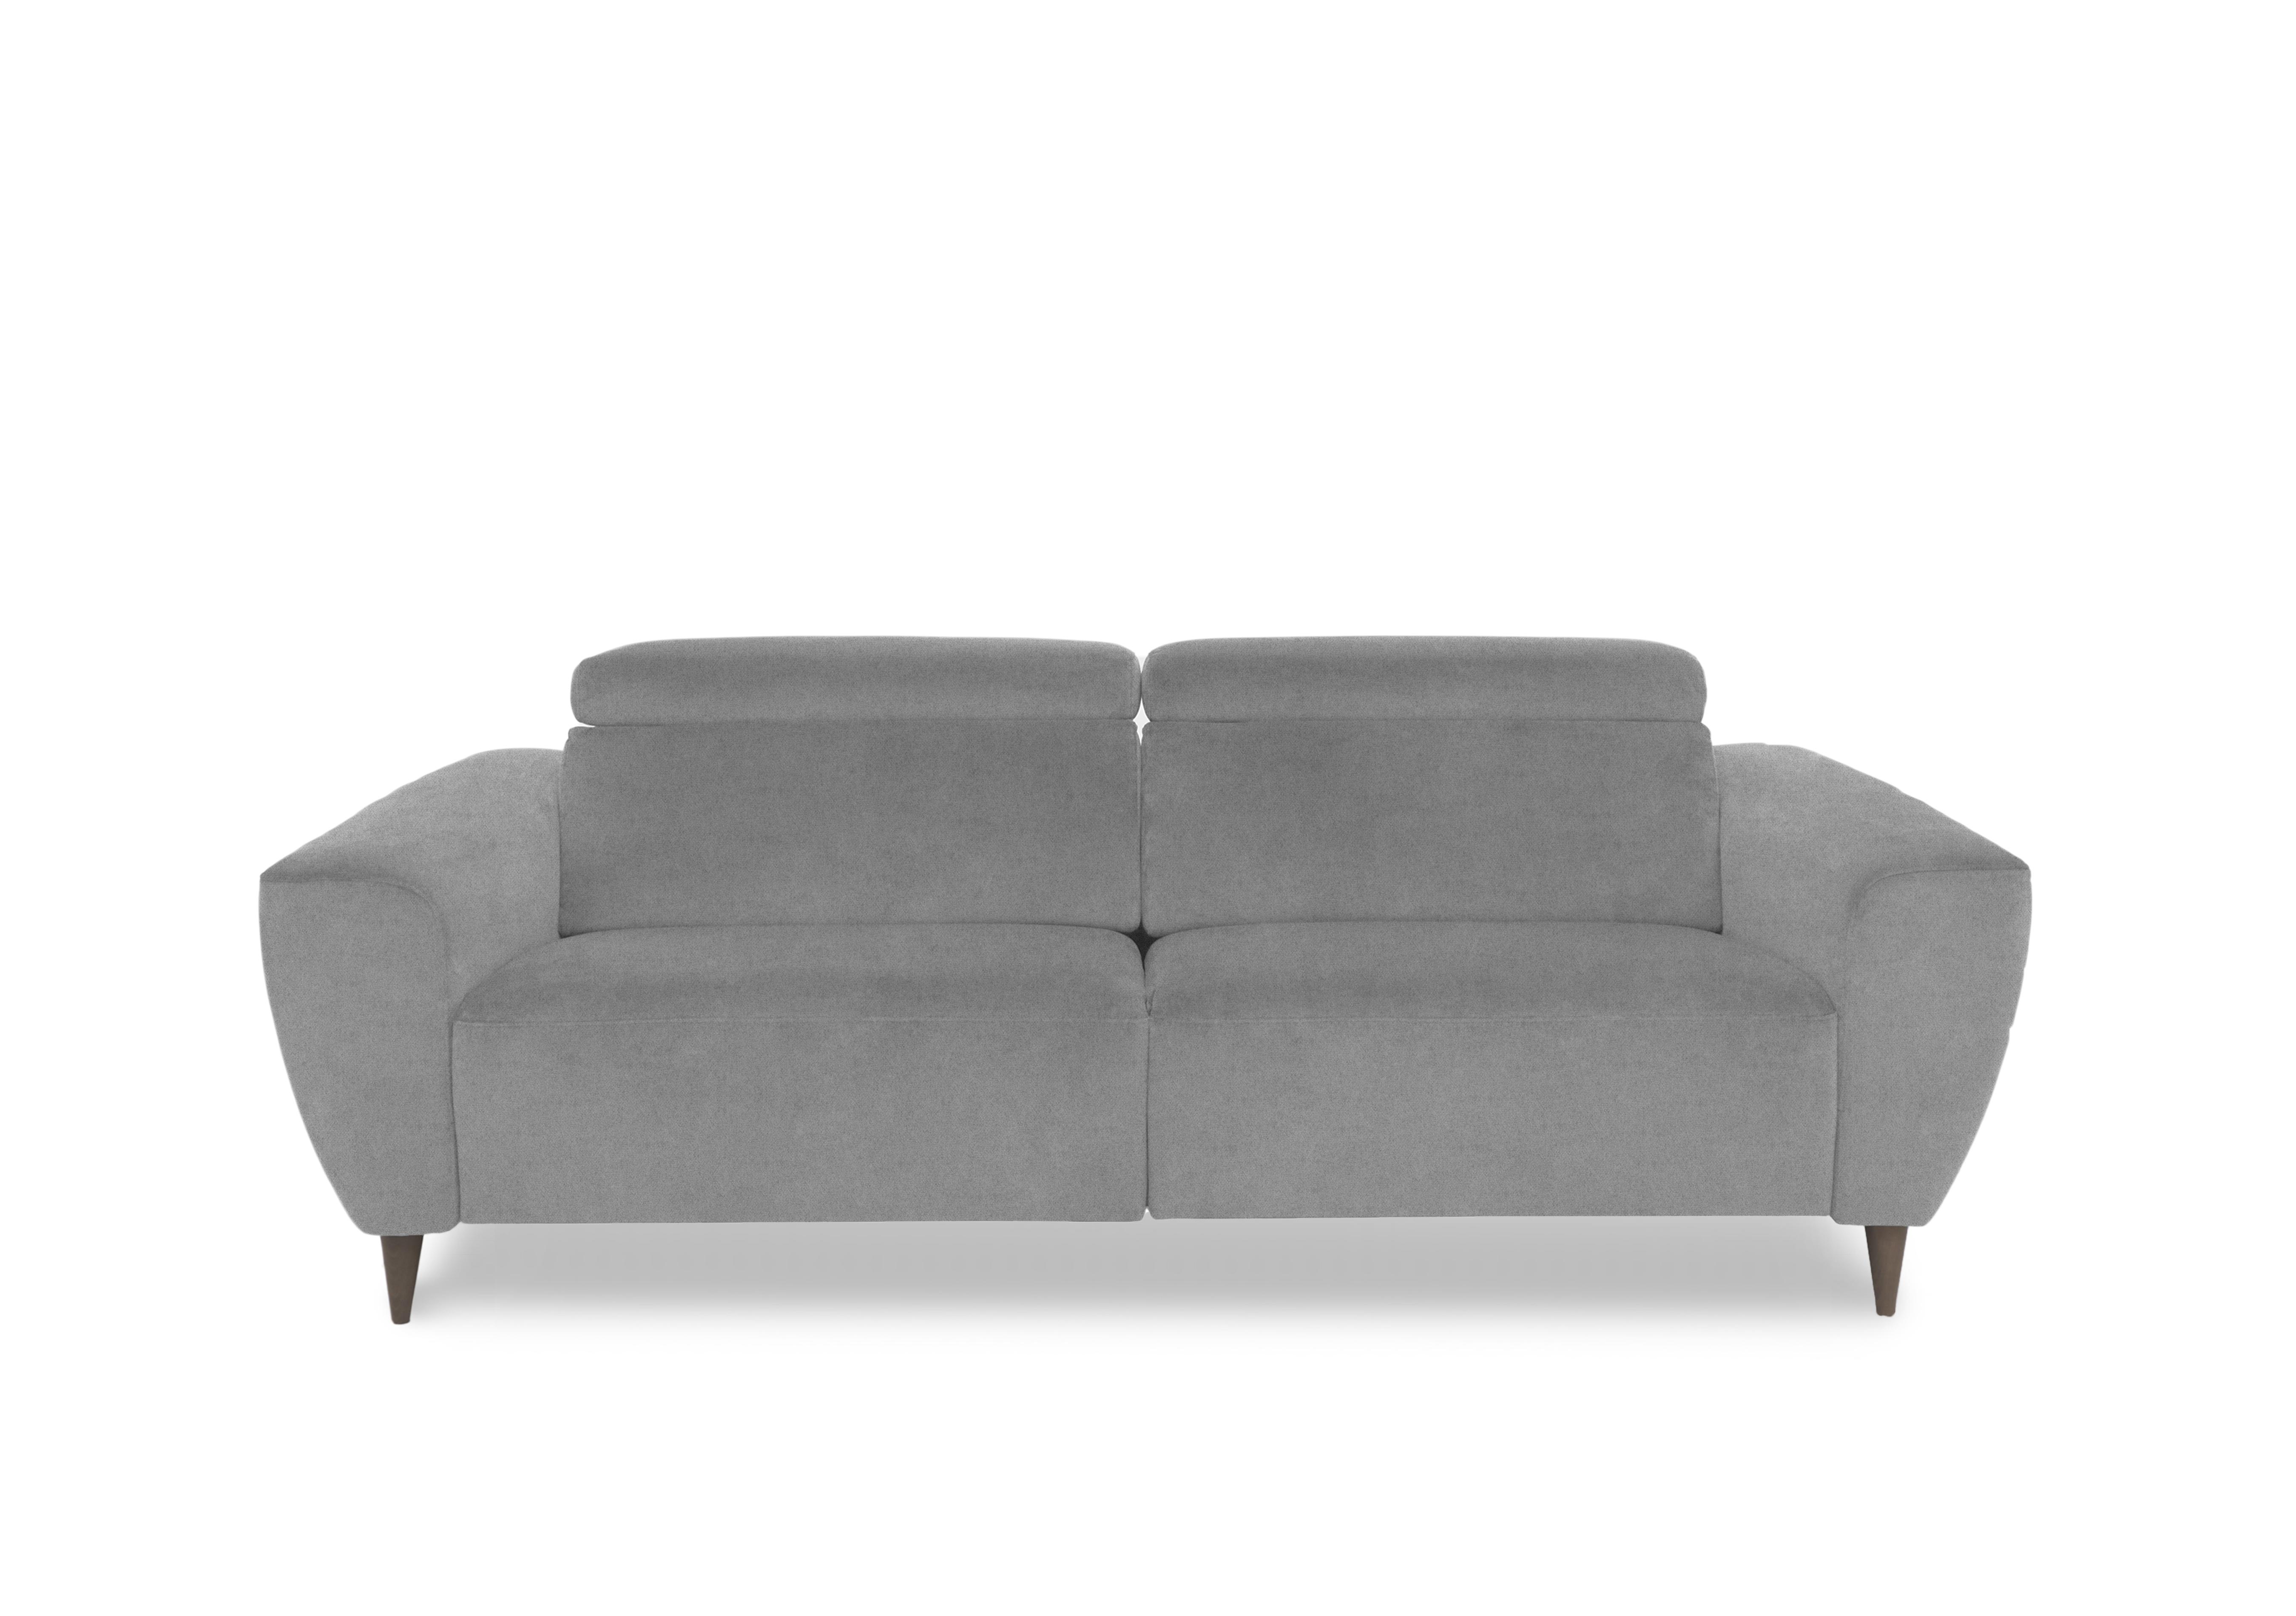 Milano 3 Seater Fabric Sofa in Fuente Ash To Ft on Furniture Village